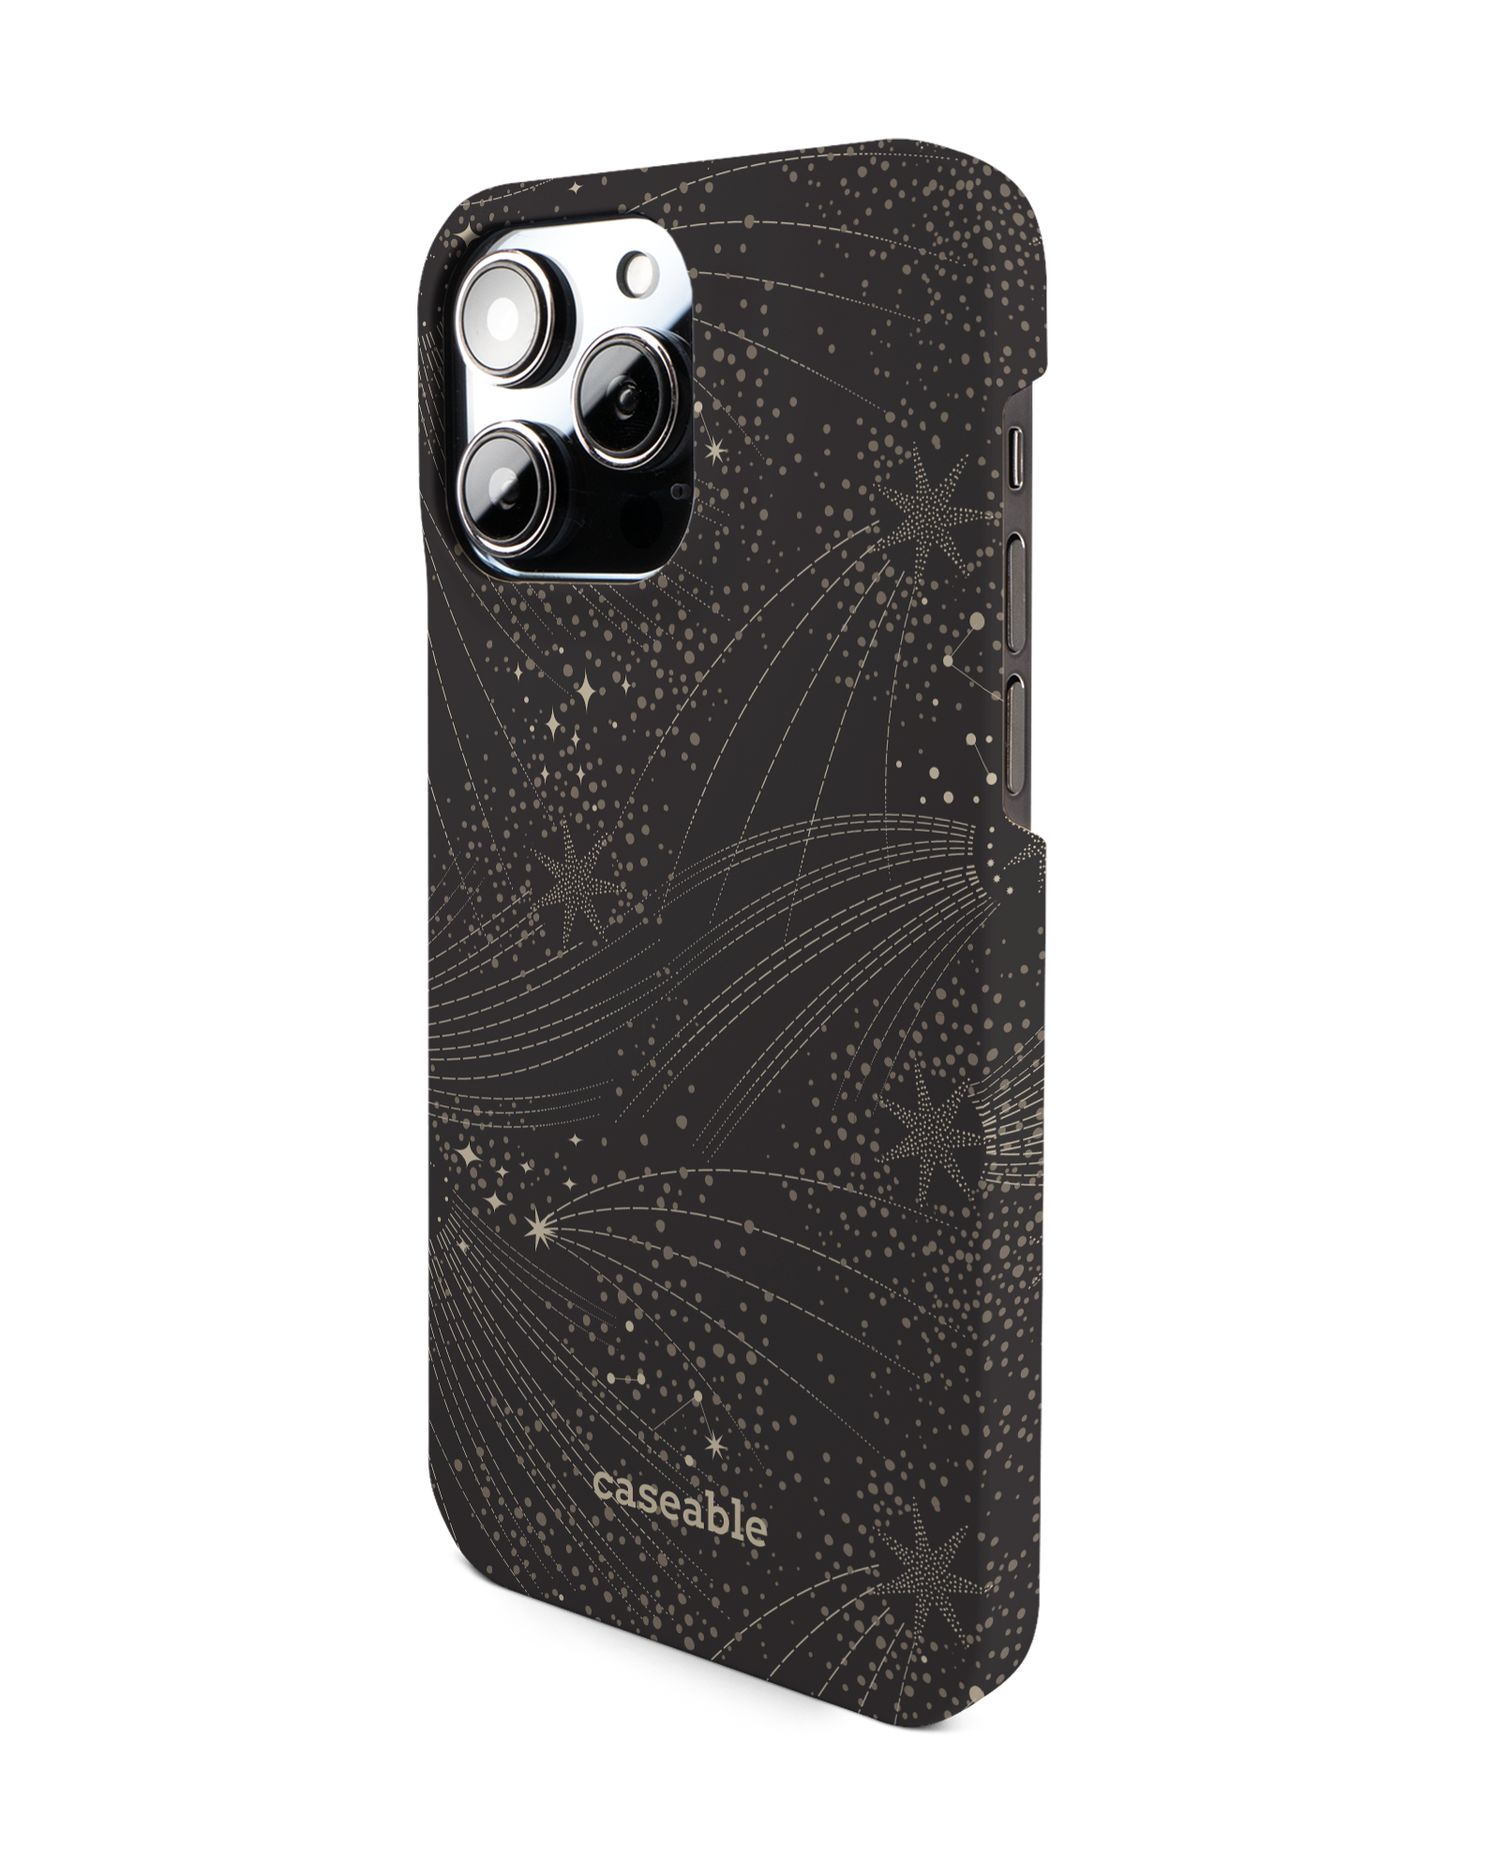 Make a Wish Star Hard Shell Phone Case for Apple iPhone 14 Pro Max: View from the right side